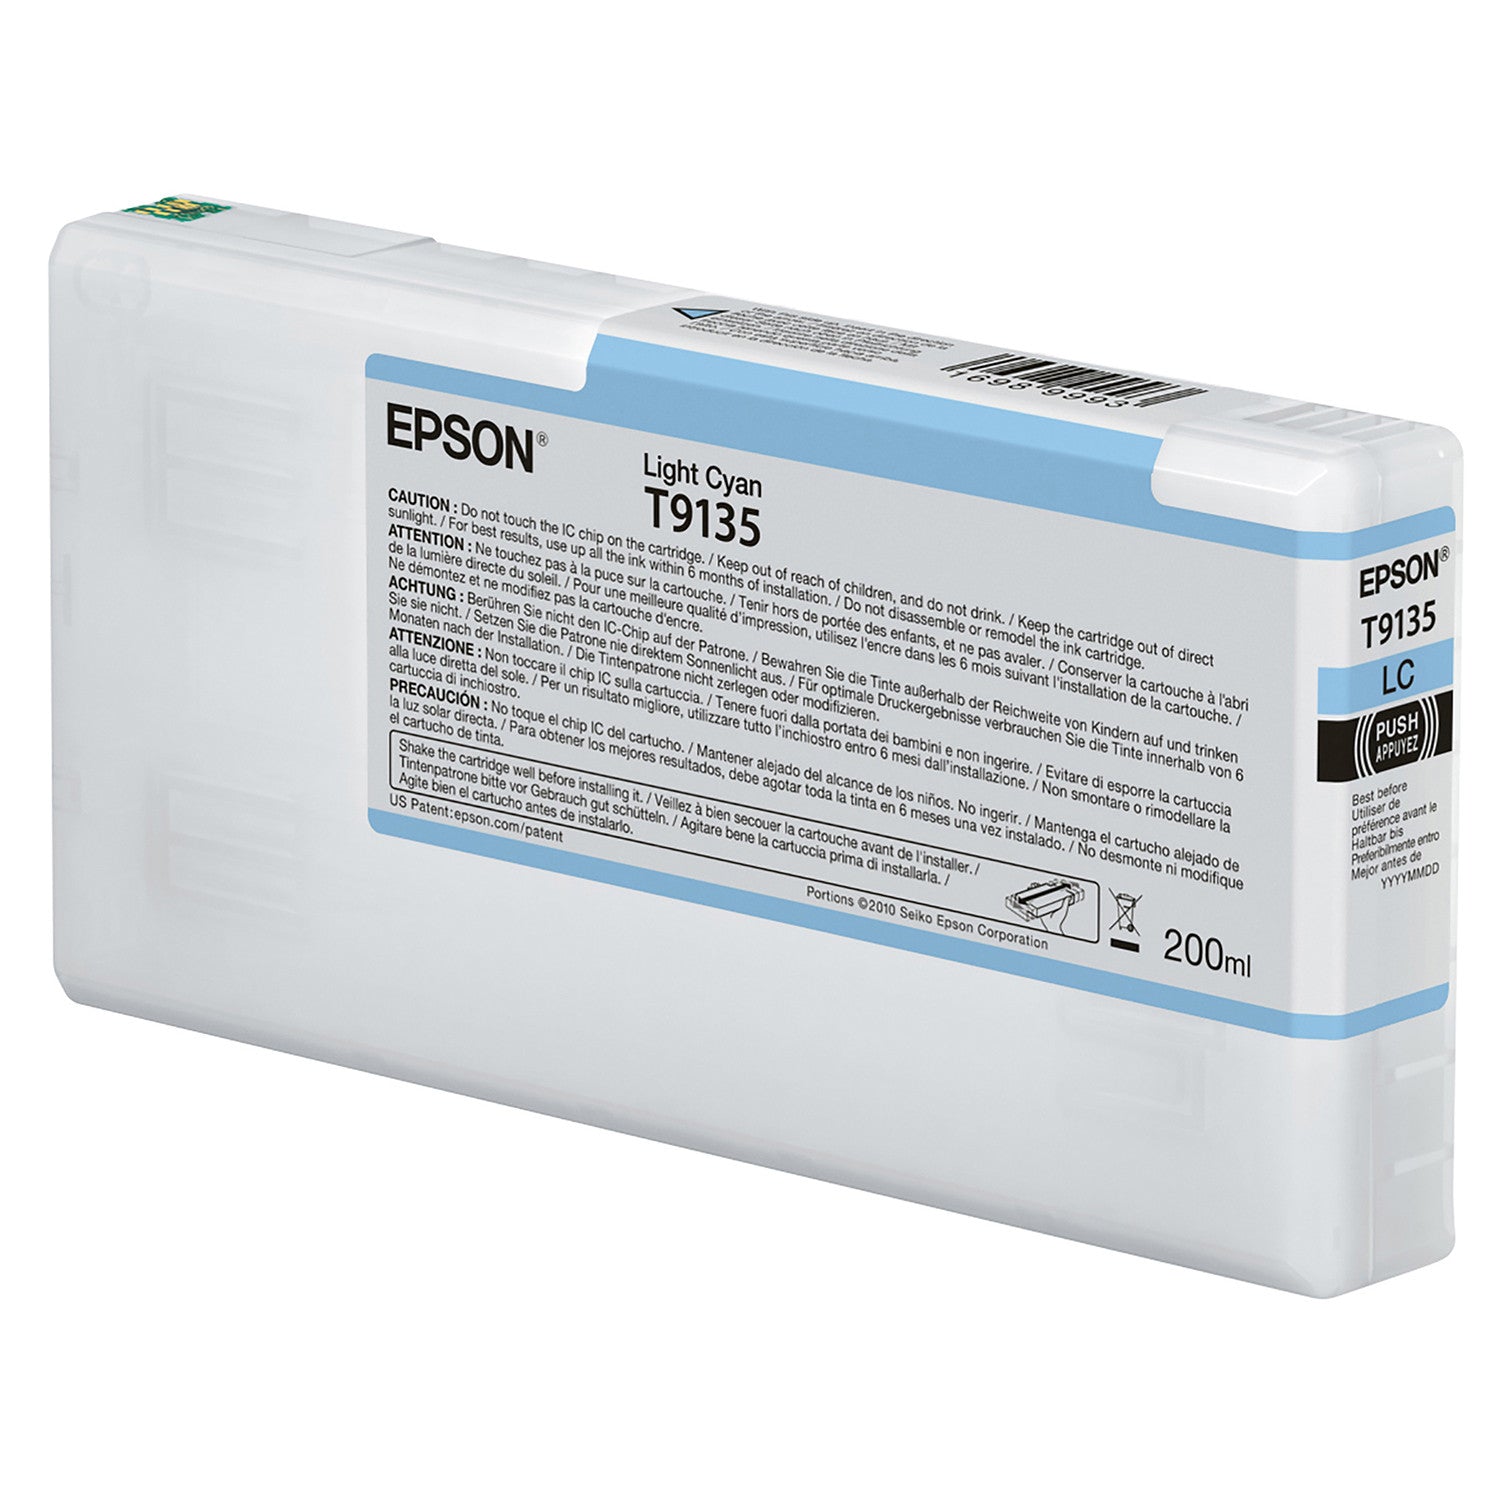 Epson T913500 P5000 Ultrachrome HD Ink 200ml Light Cyan, papers printer ink, Epson - Pictureline 